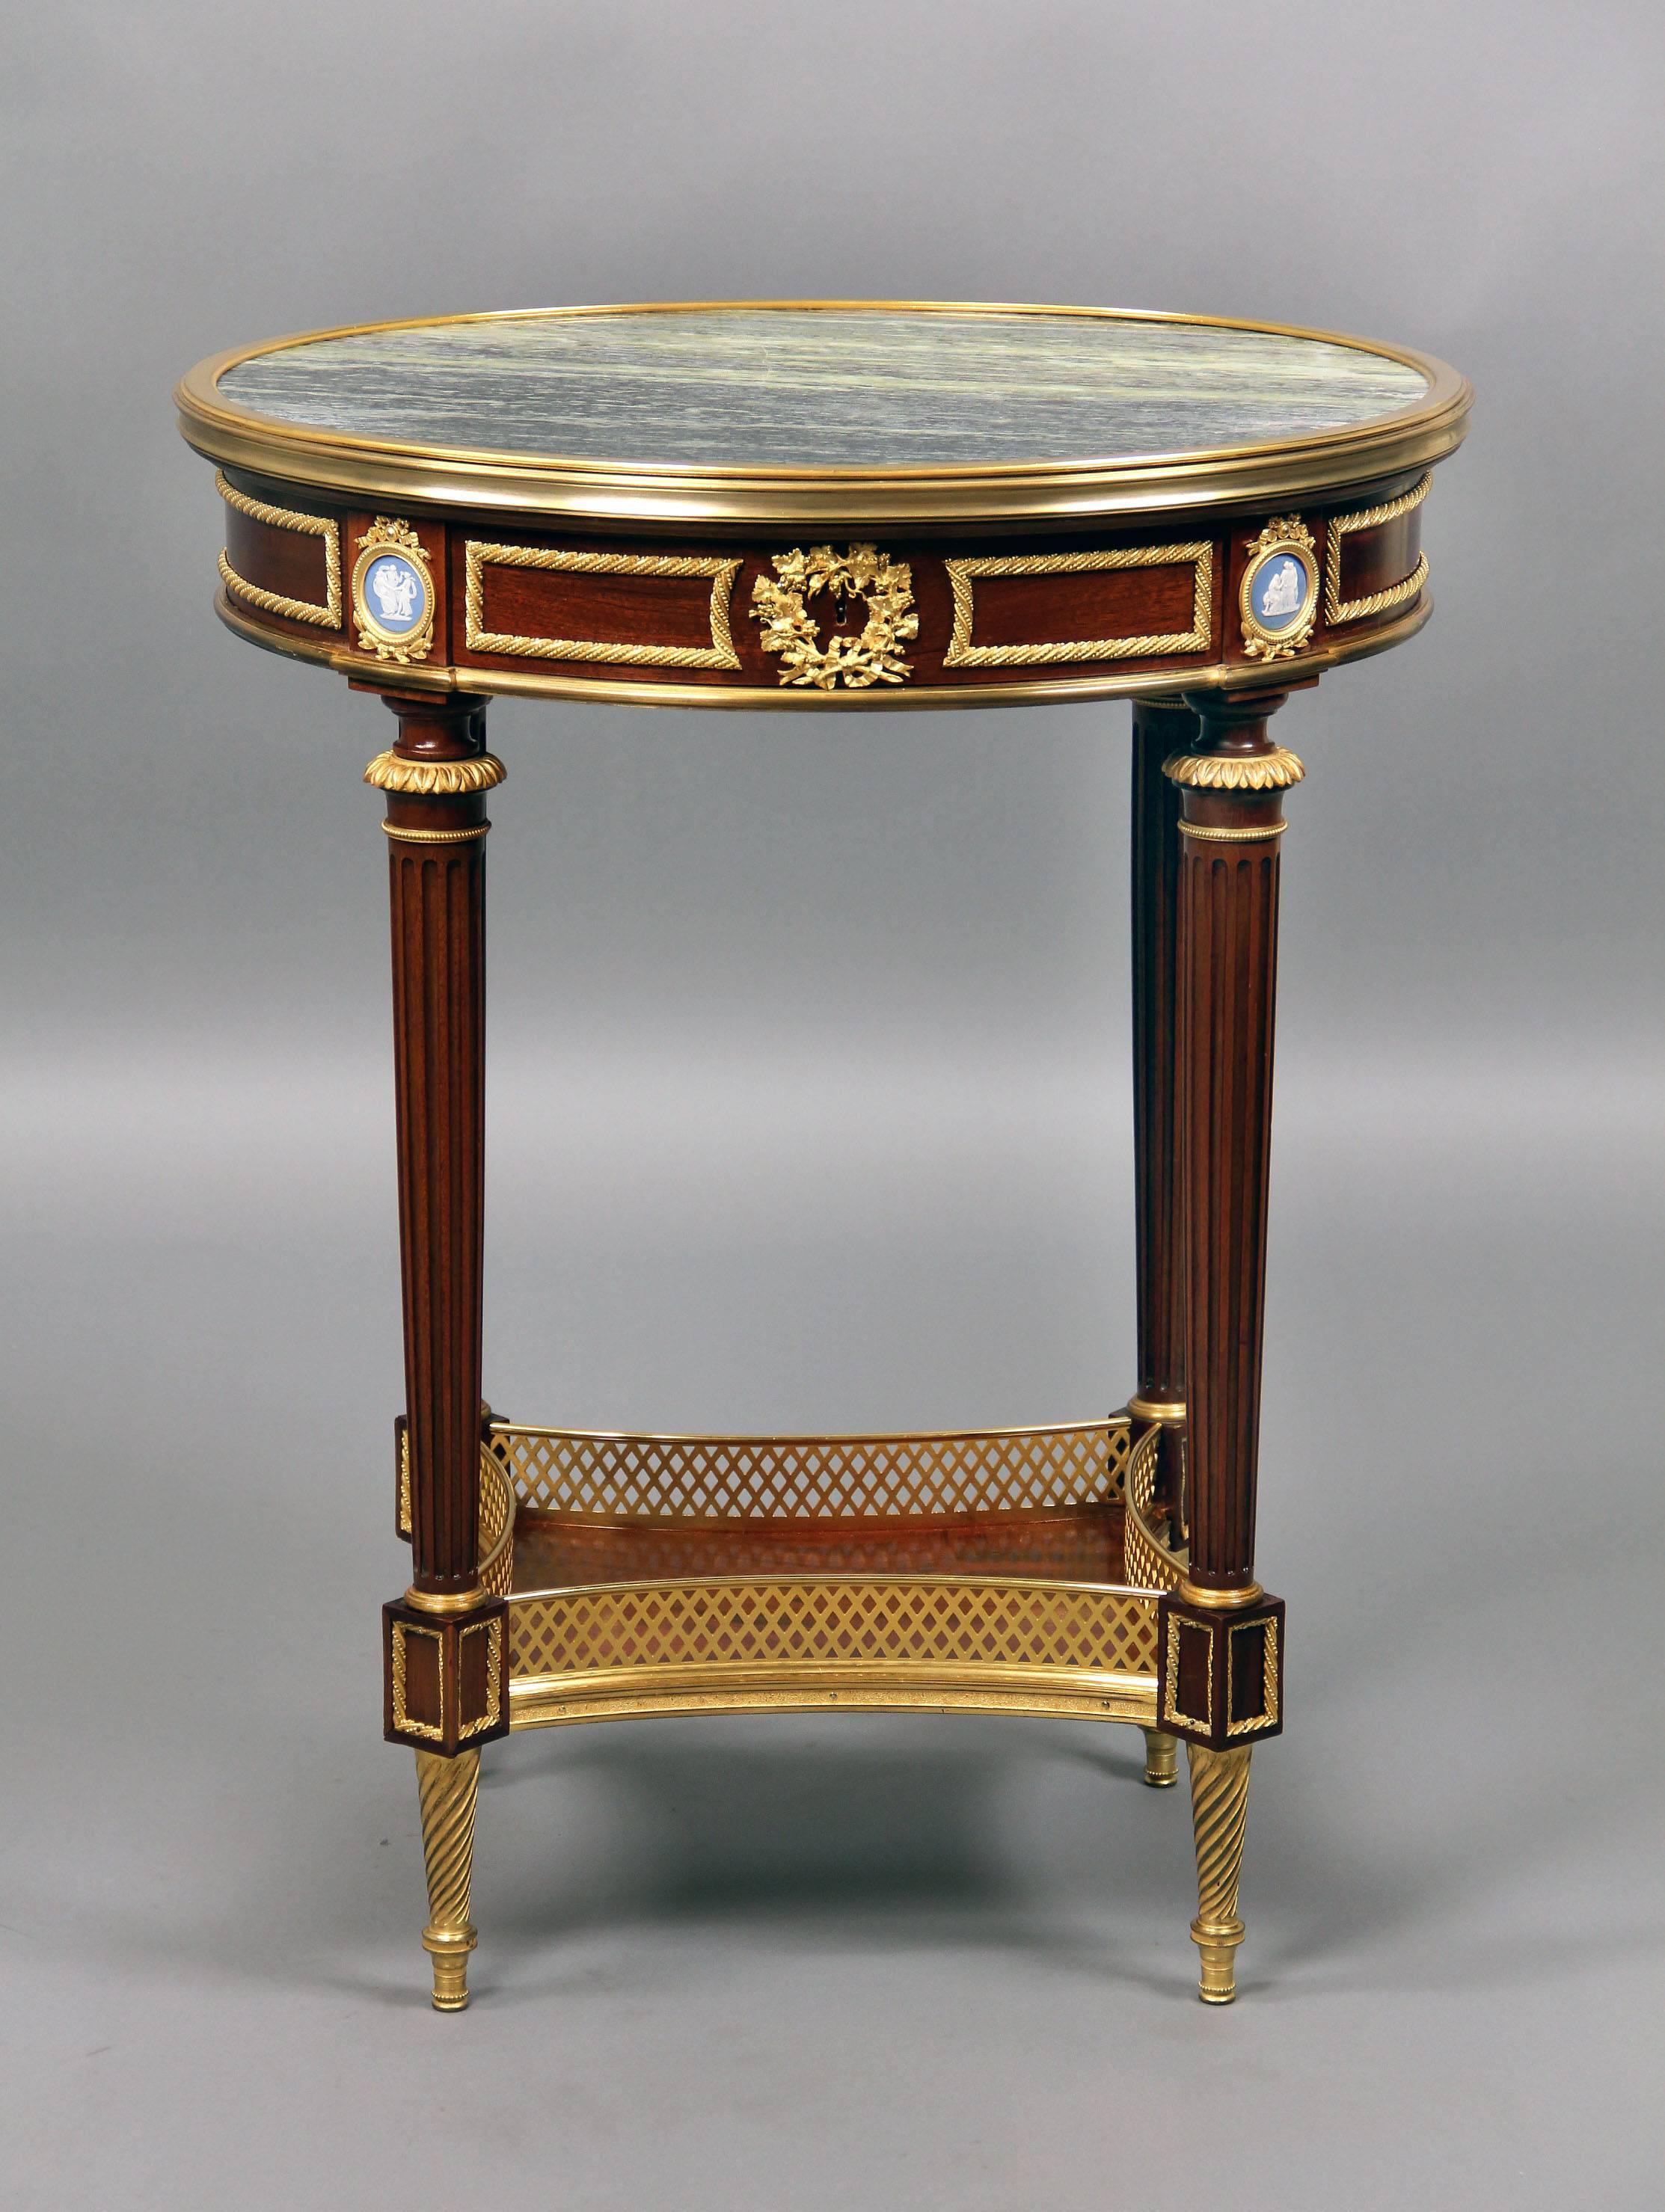 Fantastic quality early 20th century Louis XVI style gilt bronze mounted lamp table

by François Linke.

Insert marble-top above a single drawer, ribbed fluted legs beneath jasperware medallions with mythological scenes.

Lock engraved F.